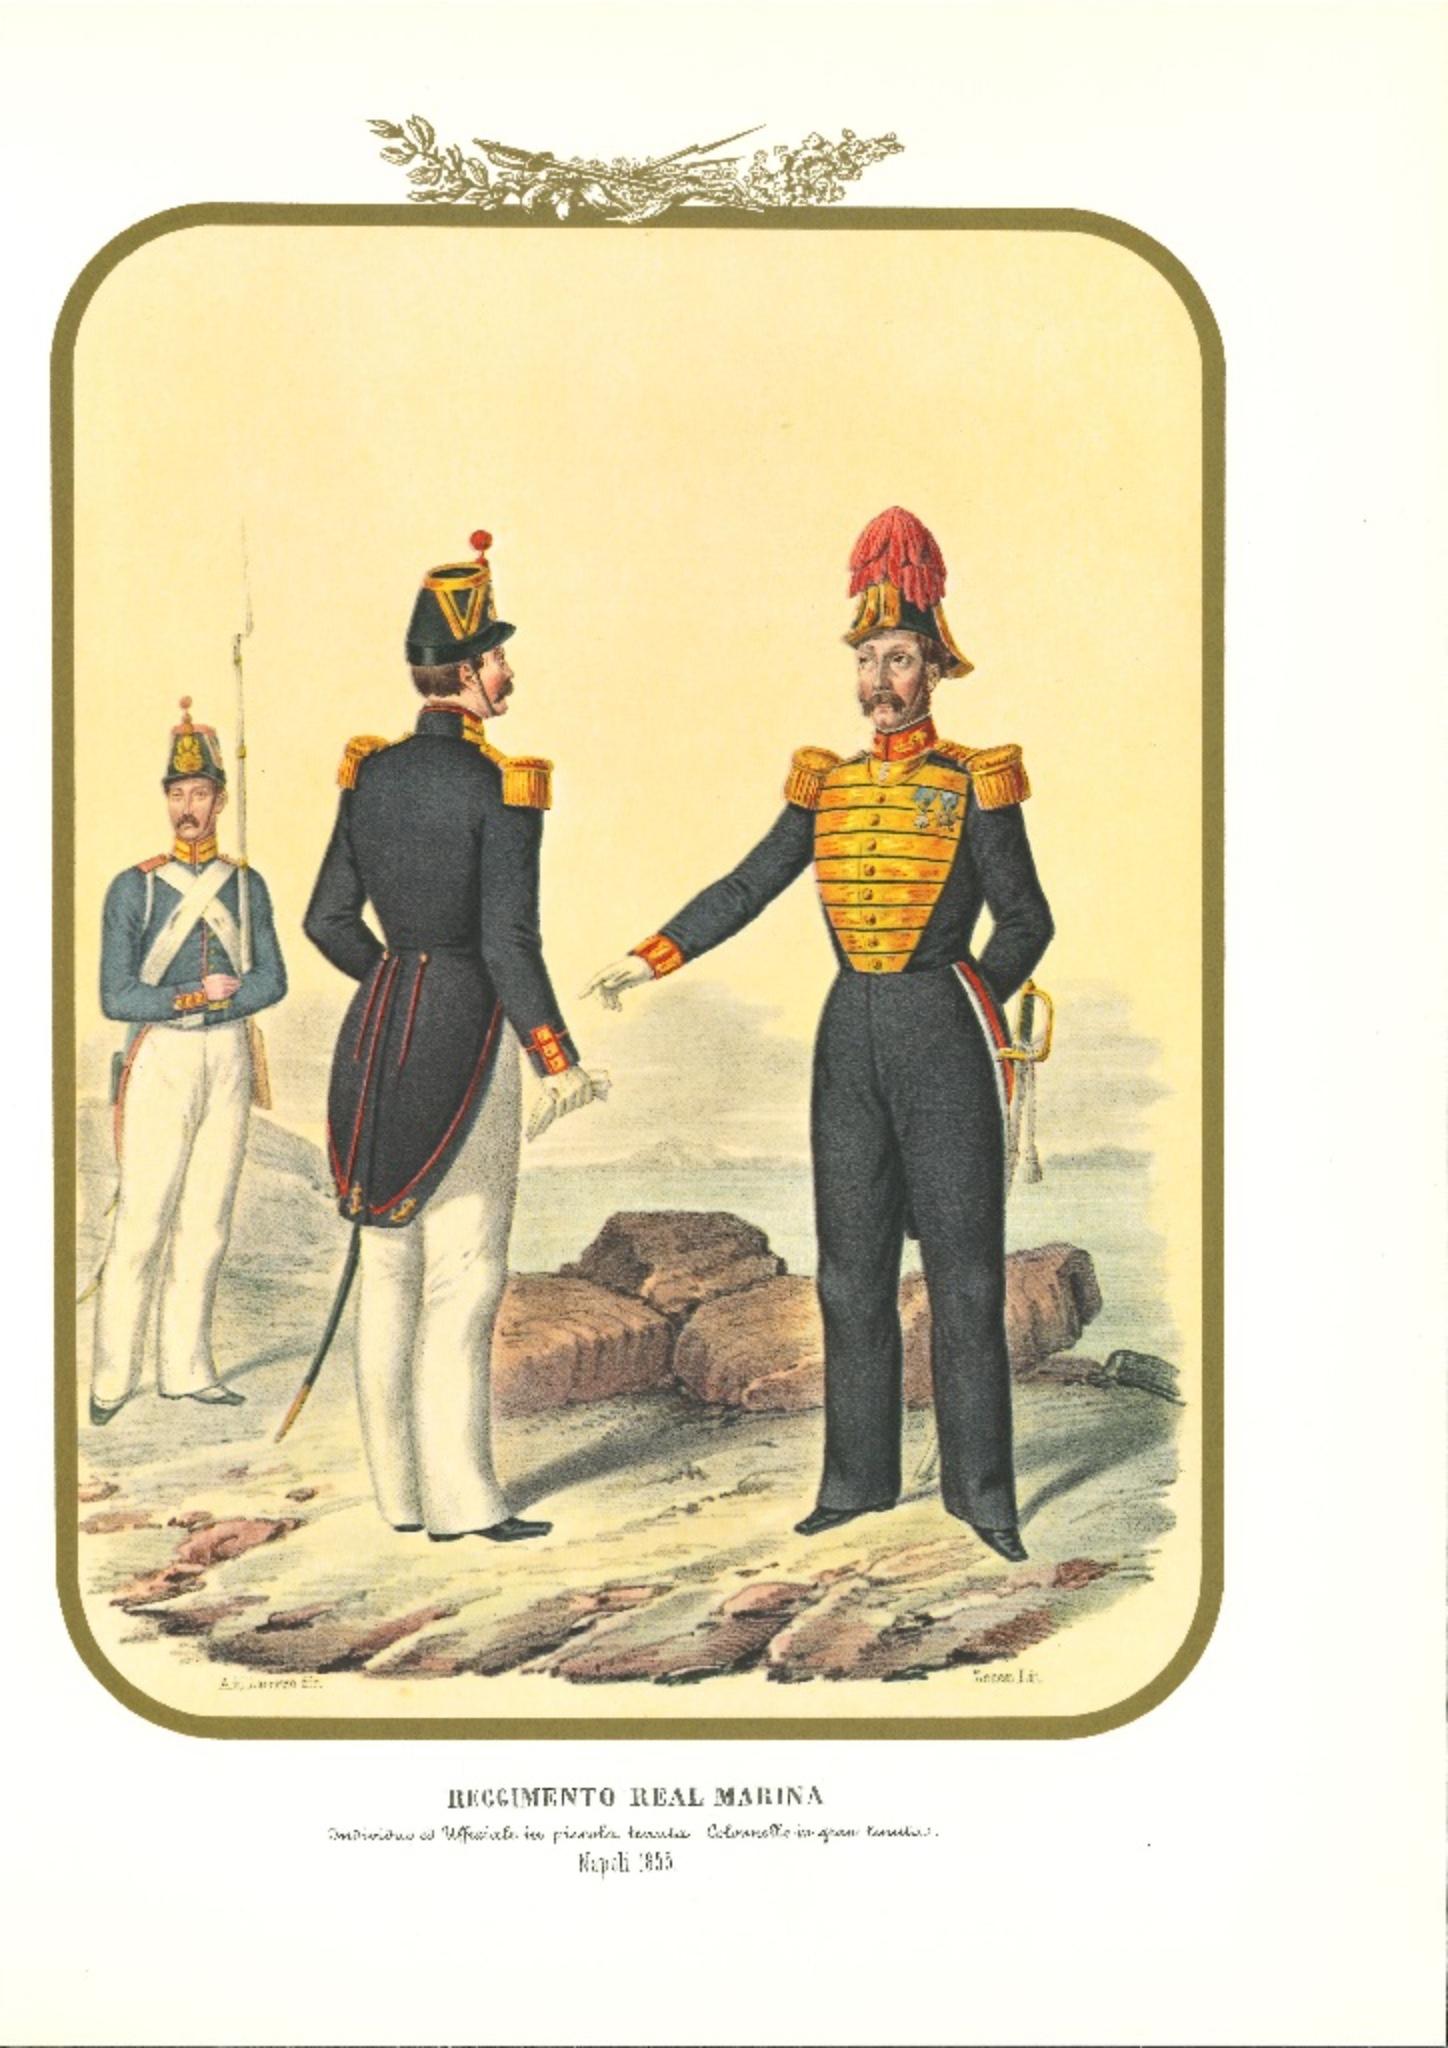 First Royal Navy Regiment is an original lithograph by Antonio Zezon. Naples 1855.

Interesting colored lithograph which describes the Royal Navy Regiment: in the lithograph there are a soldier, an Officer in small estate and a Colonel in great